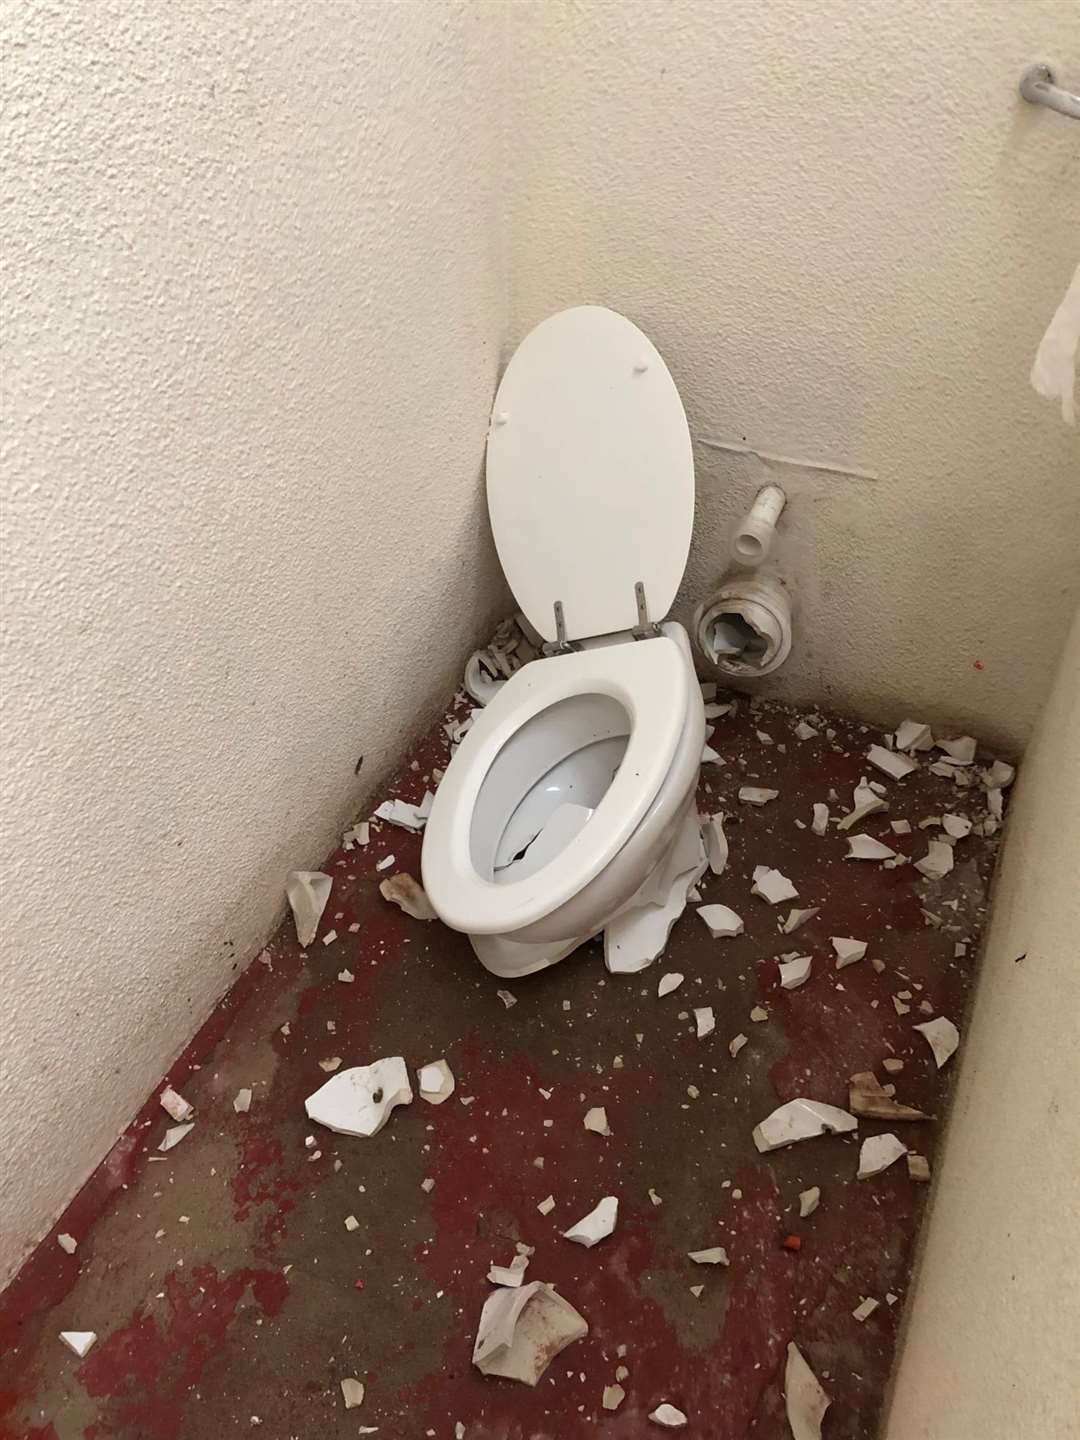 This toilet was smashed overnight on Friday.